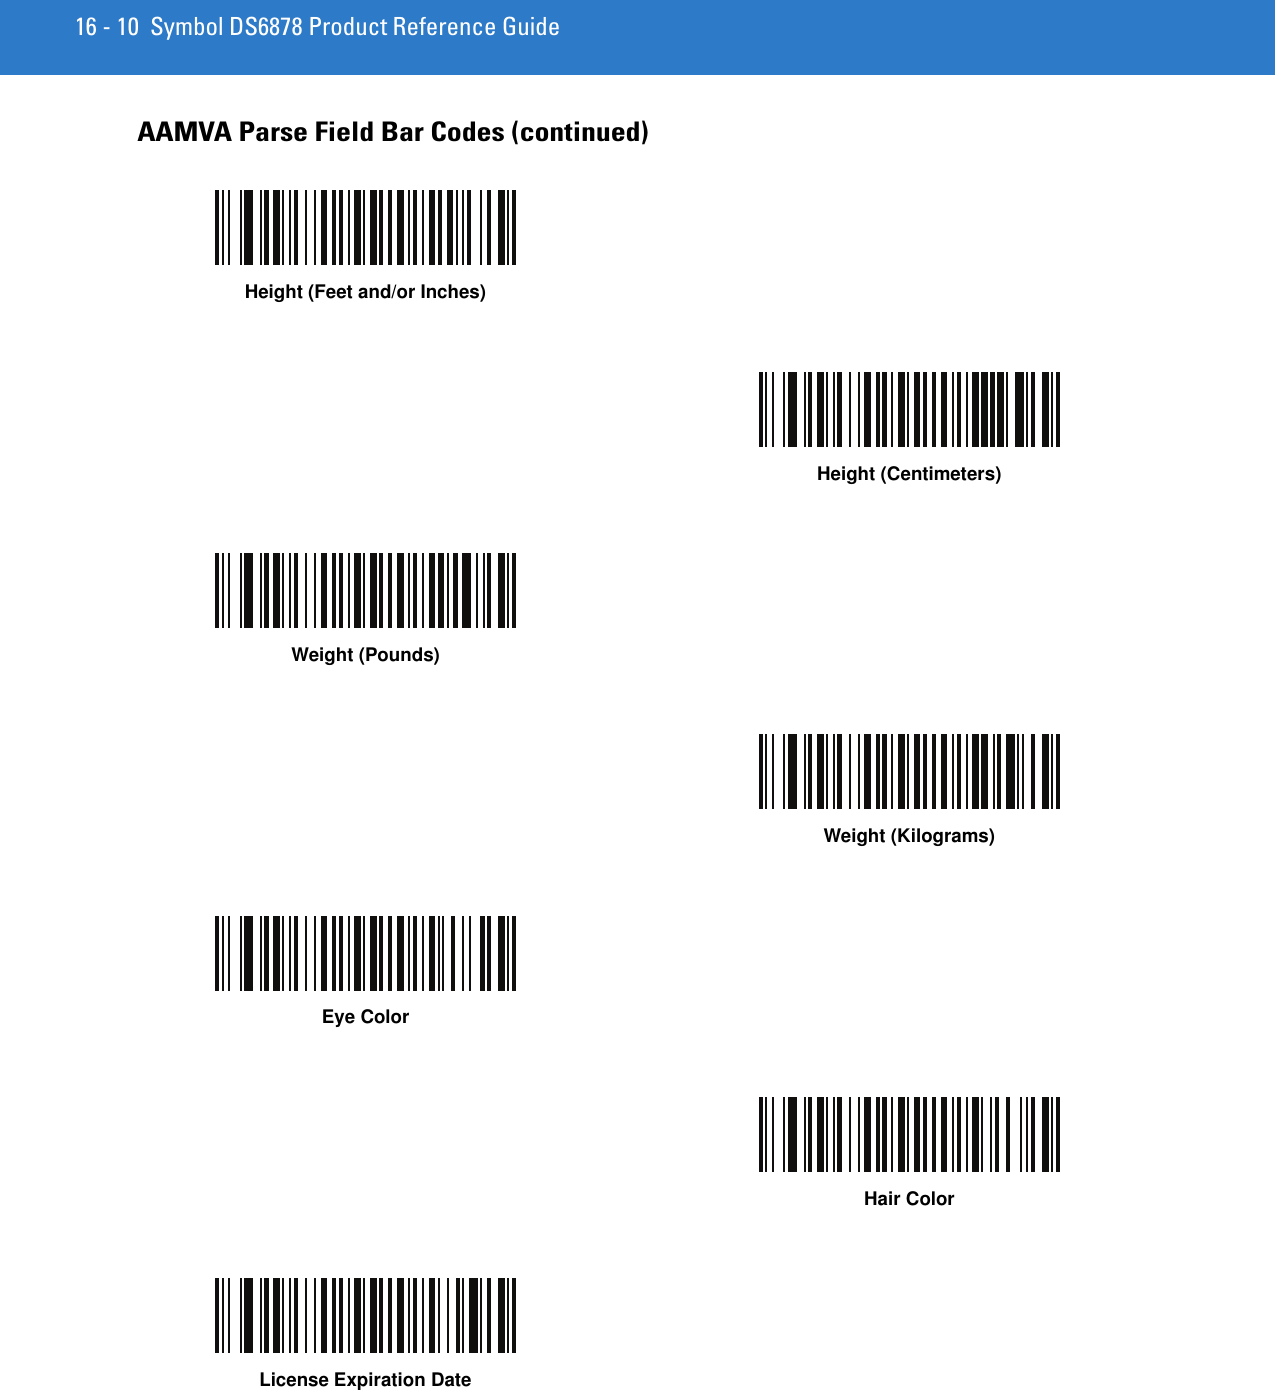 16 - 10 Symbol DS6878 Product Reference GuideAAMVA Parse Field Bar Codes (continued)Height (Feet and/or Inches)Height (Centimeters)Weight (Pounds)Weight (Kilograms)Eye ColorHair ColorLicense Expiration Date